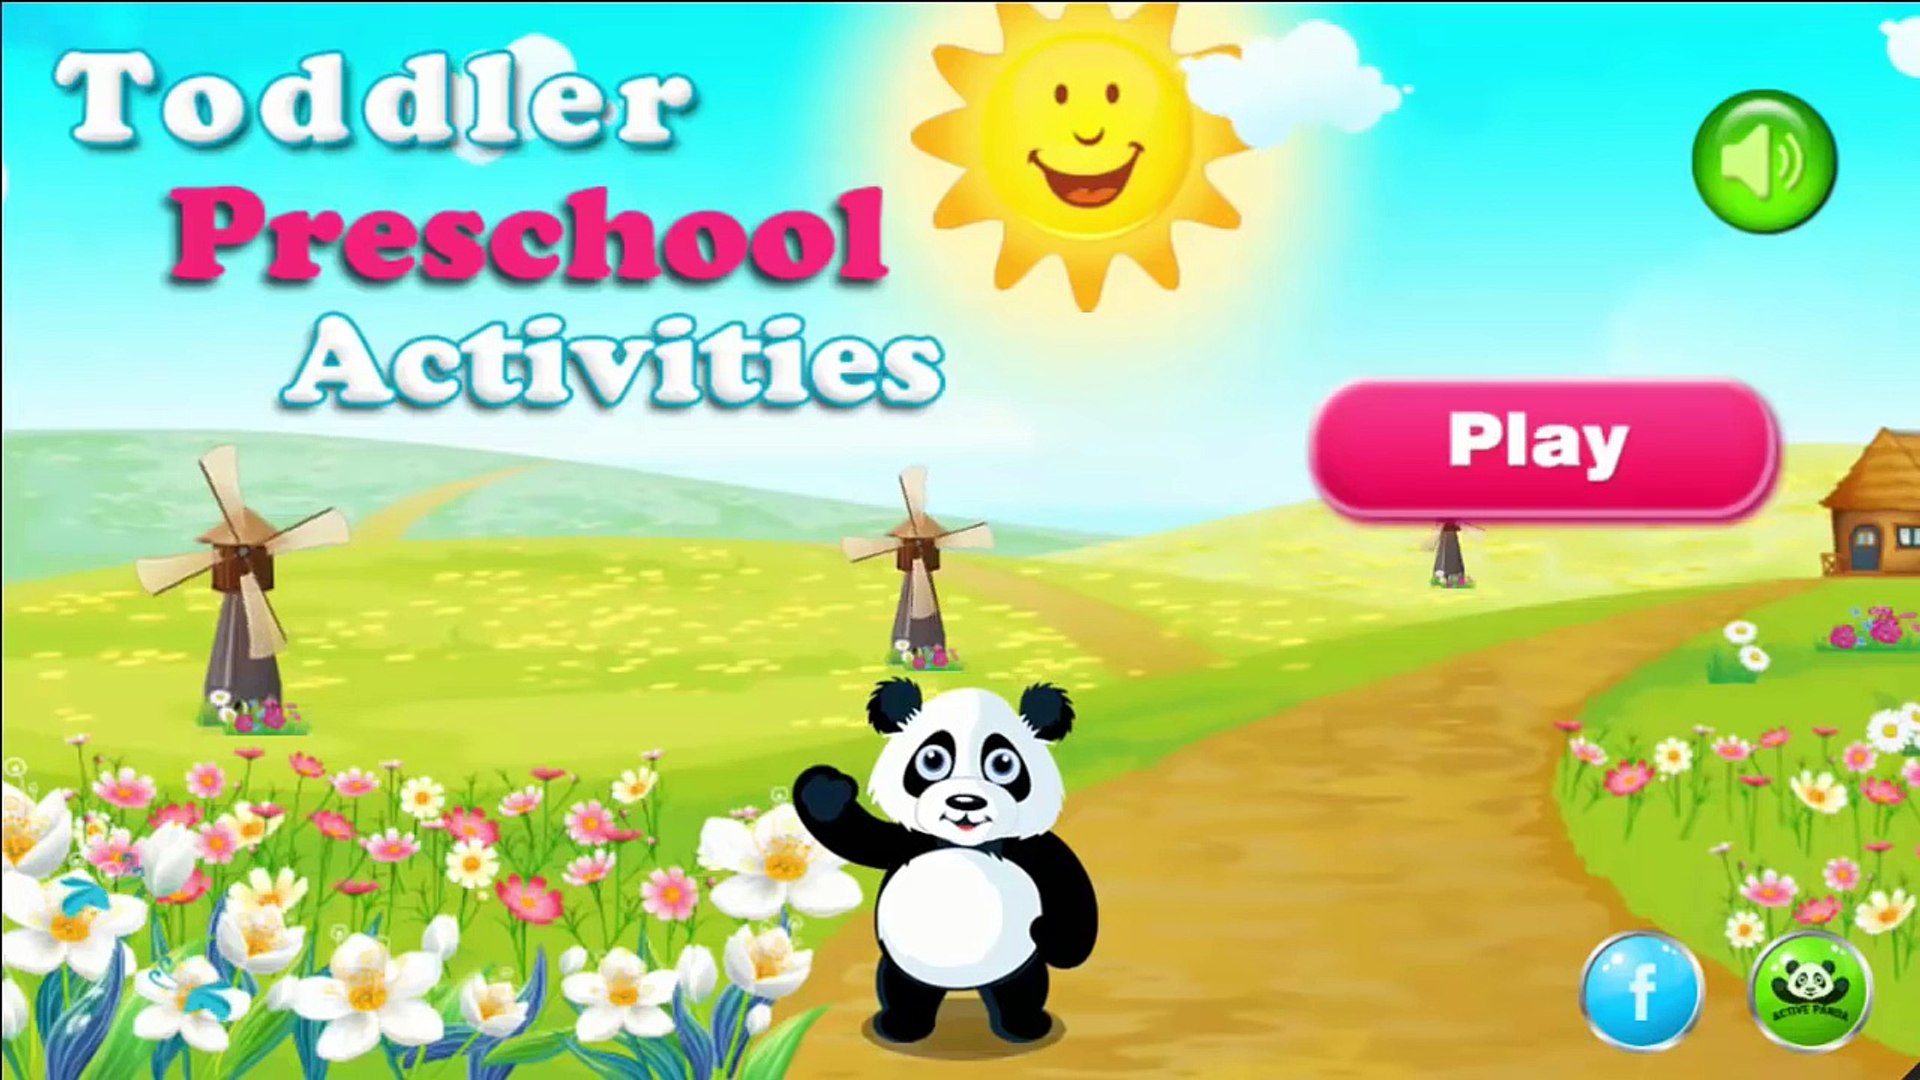 Toddler Preschool Activities - Education - Videos Games for Kids - Girls - Baby Android